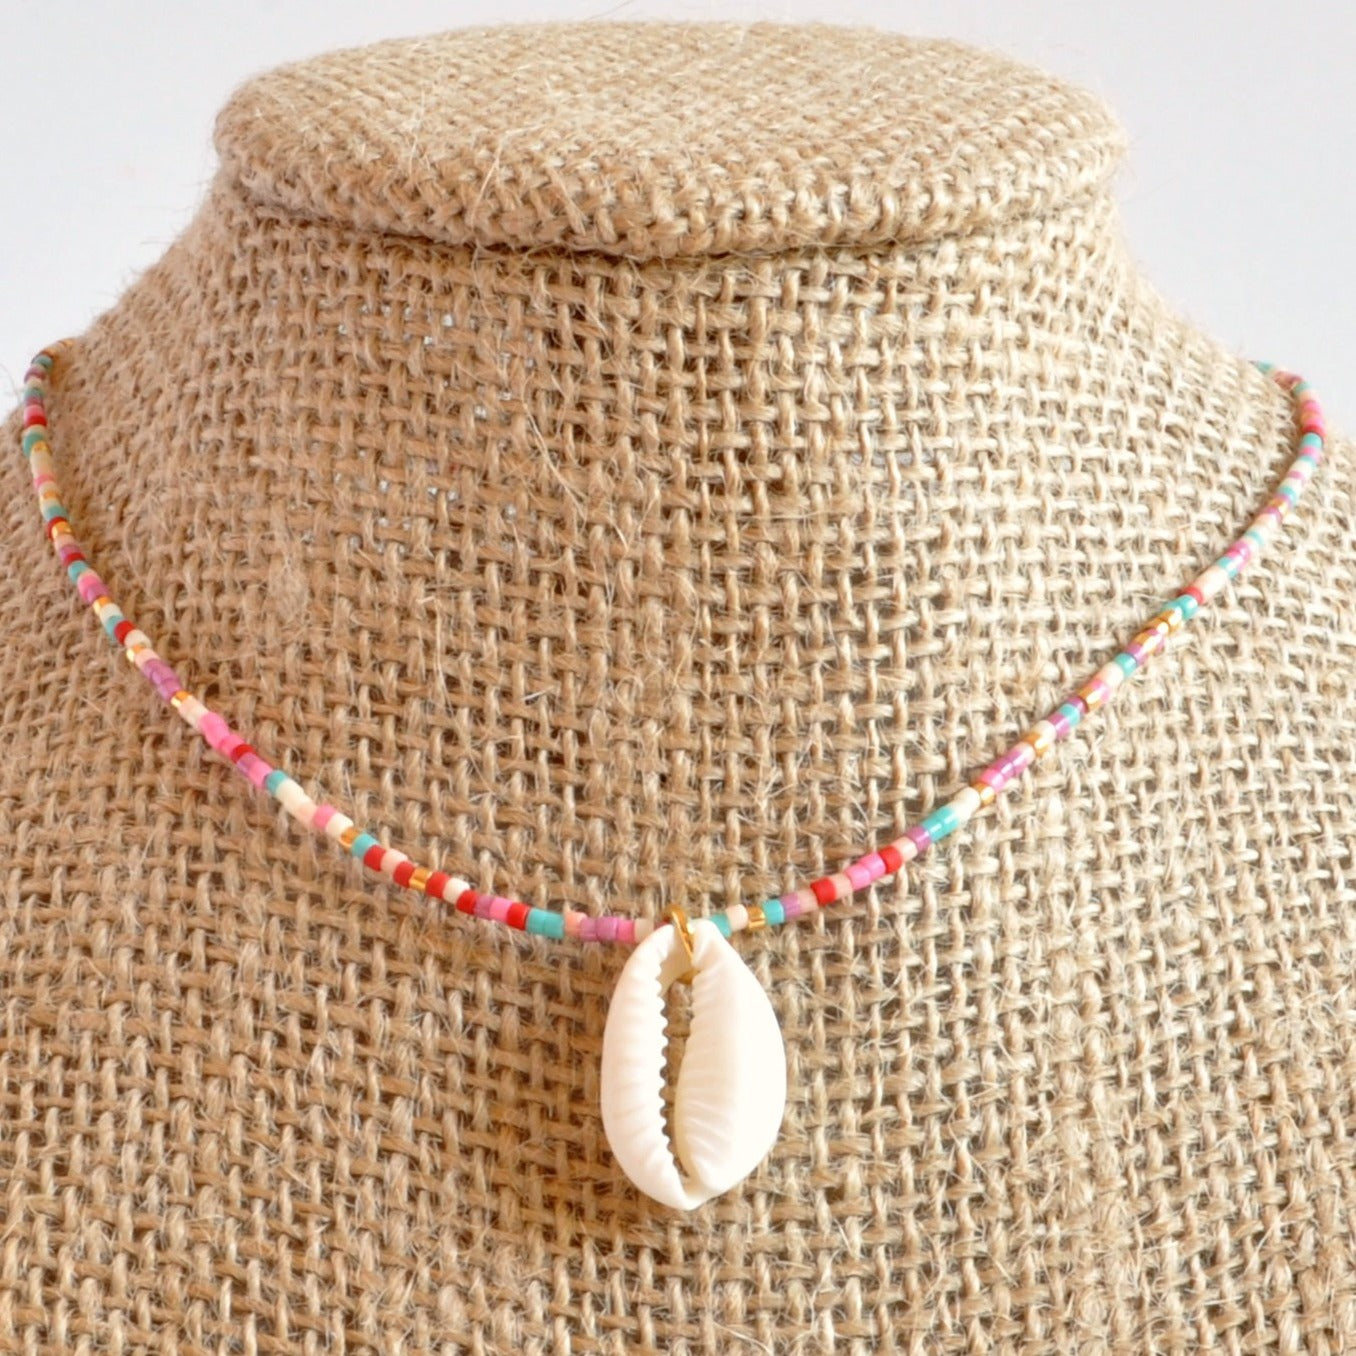 Libby & Smee Seashell Choker Necklace in Cotton Candy Mix: pink, purple, peach gold, ivory, on mannequin